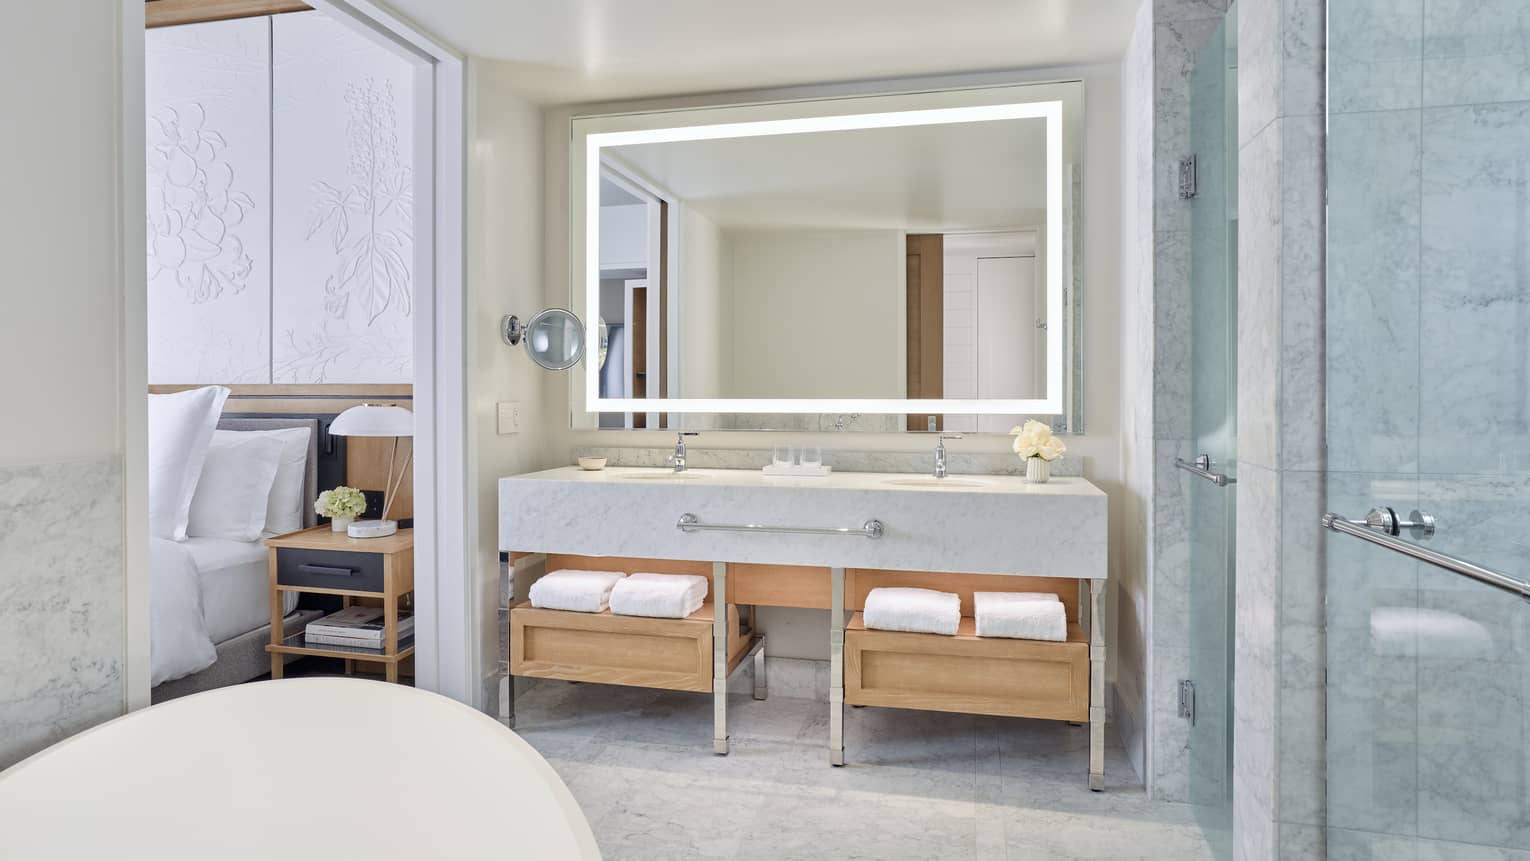 Deluxe City-View Room Bathroom with double vanity and full-width lighted mirror